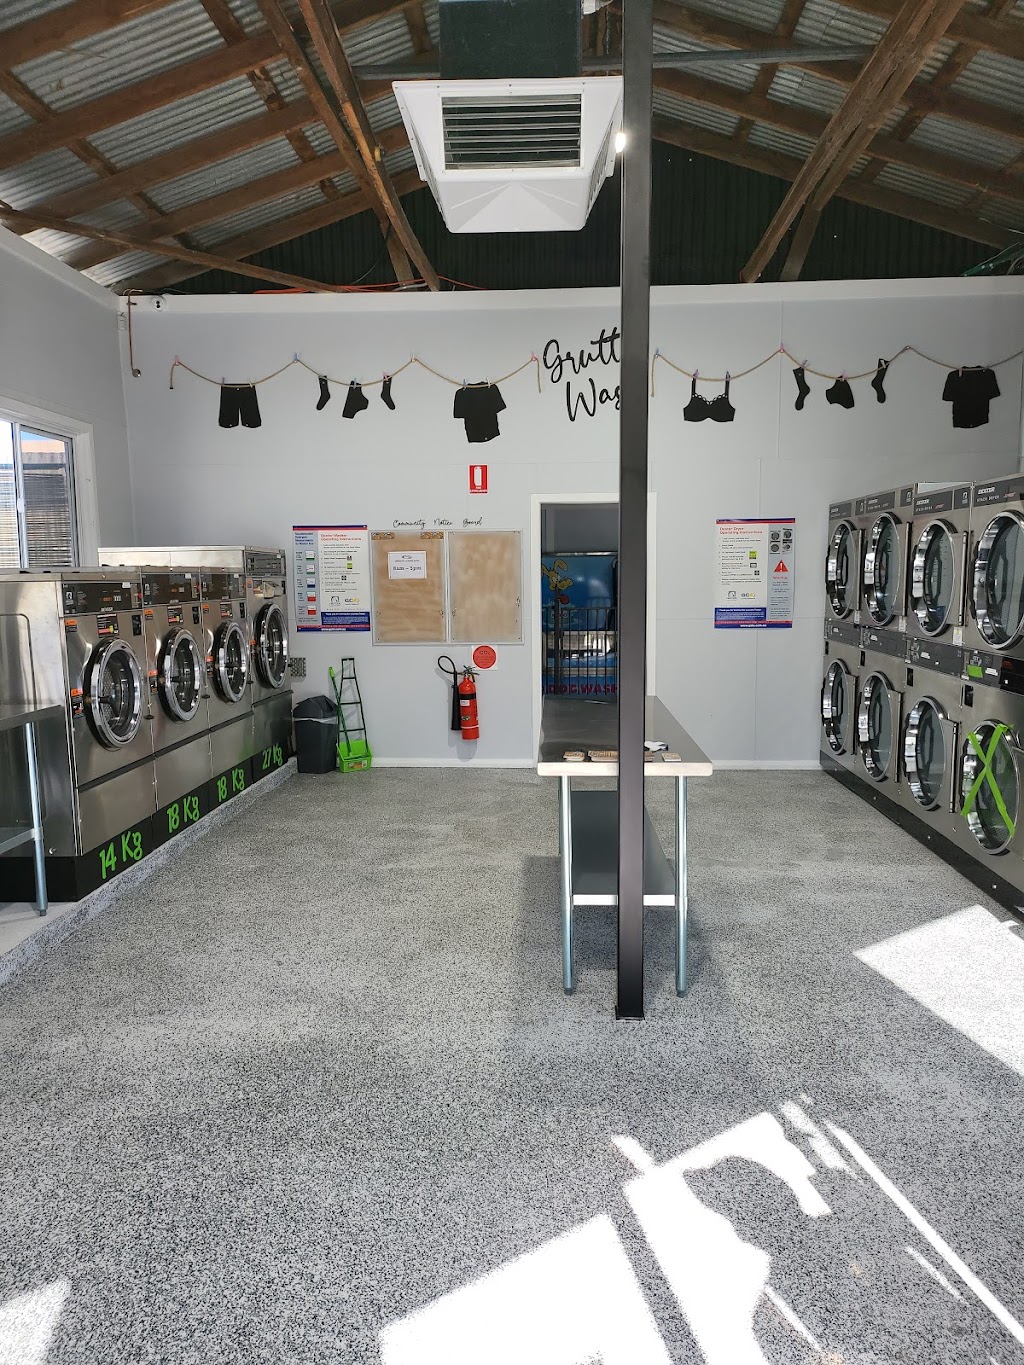 Grutts and Mutts Wash Laundromat and Dog Wash | laundry | 44 Alice St, Moree NSW 2400, Australia | 0417278276 OR +61 417 278 276